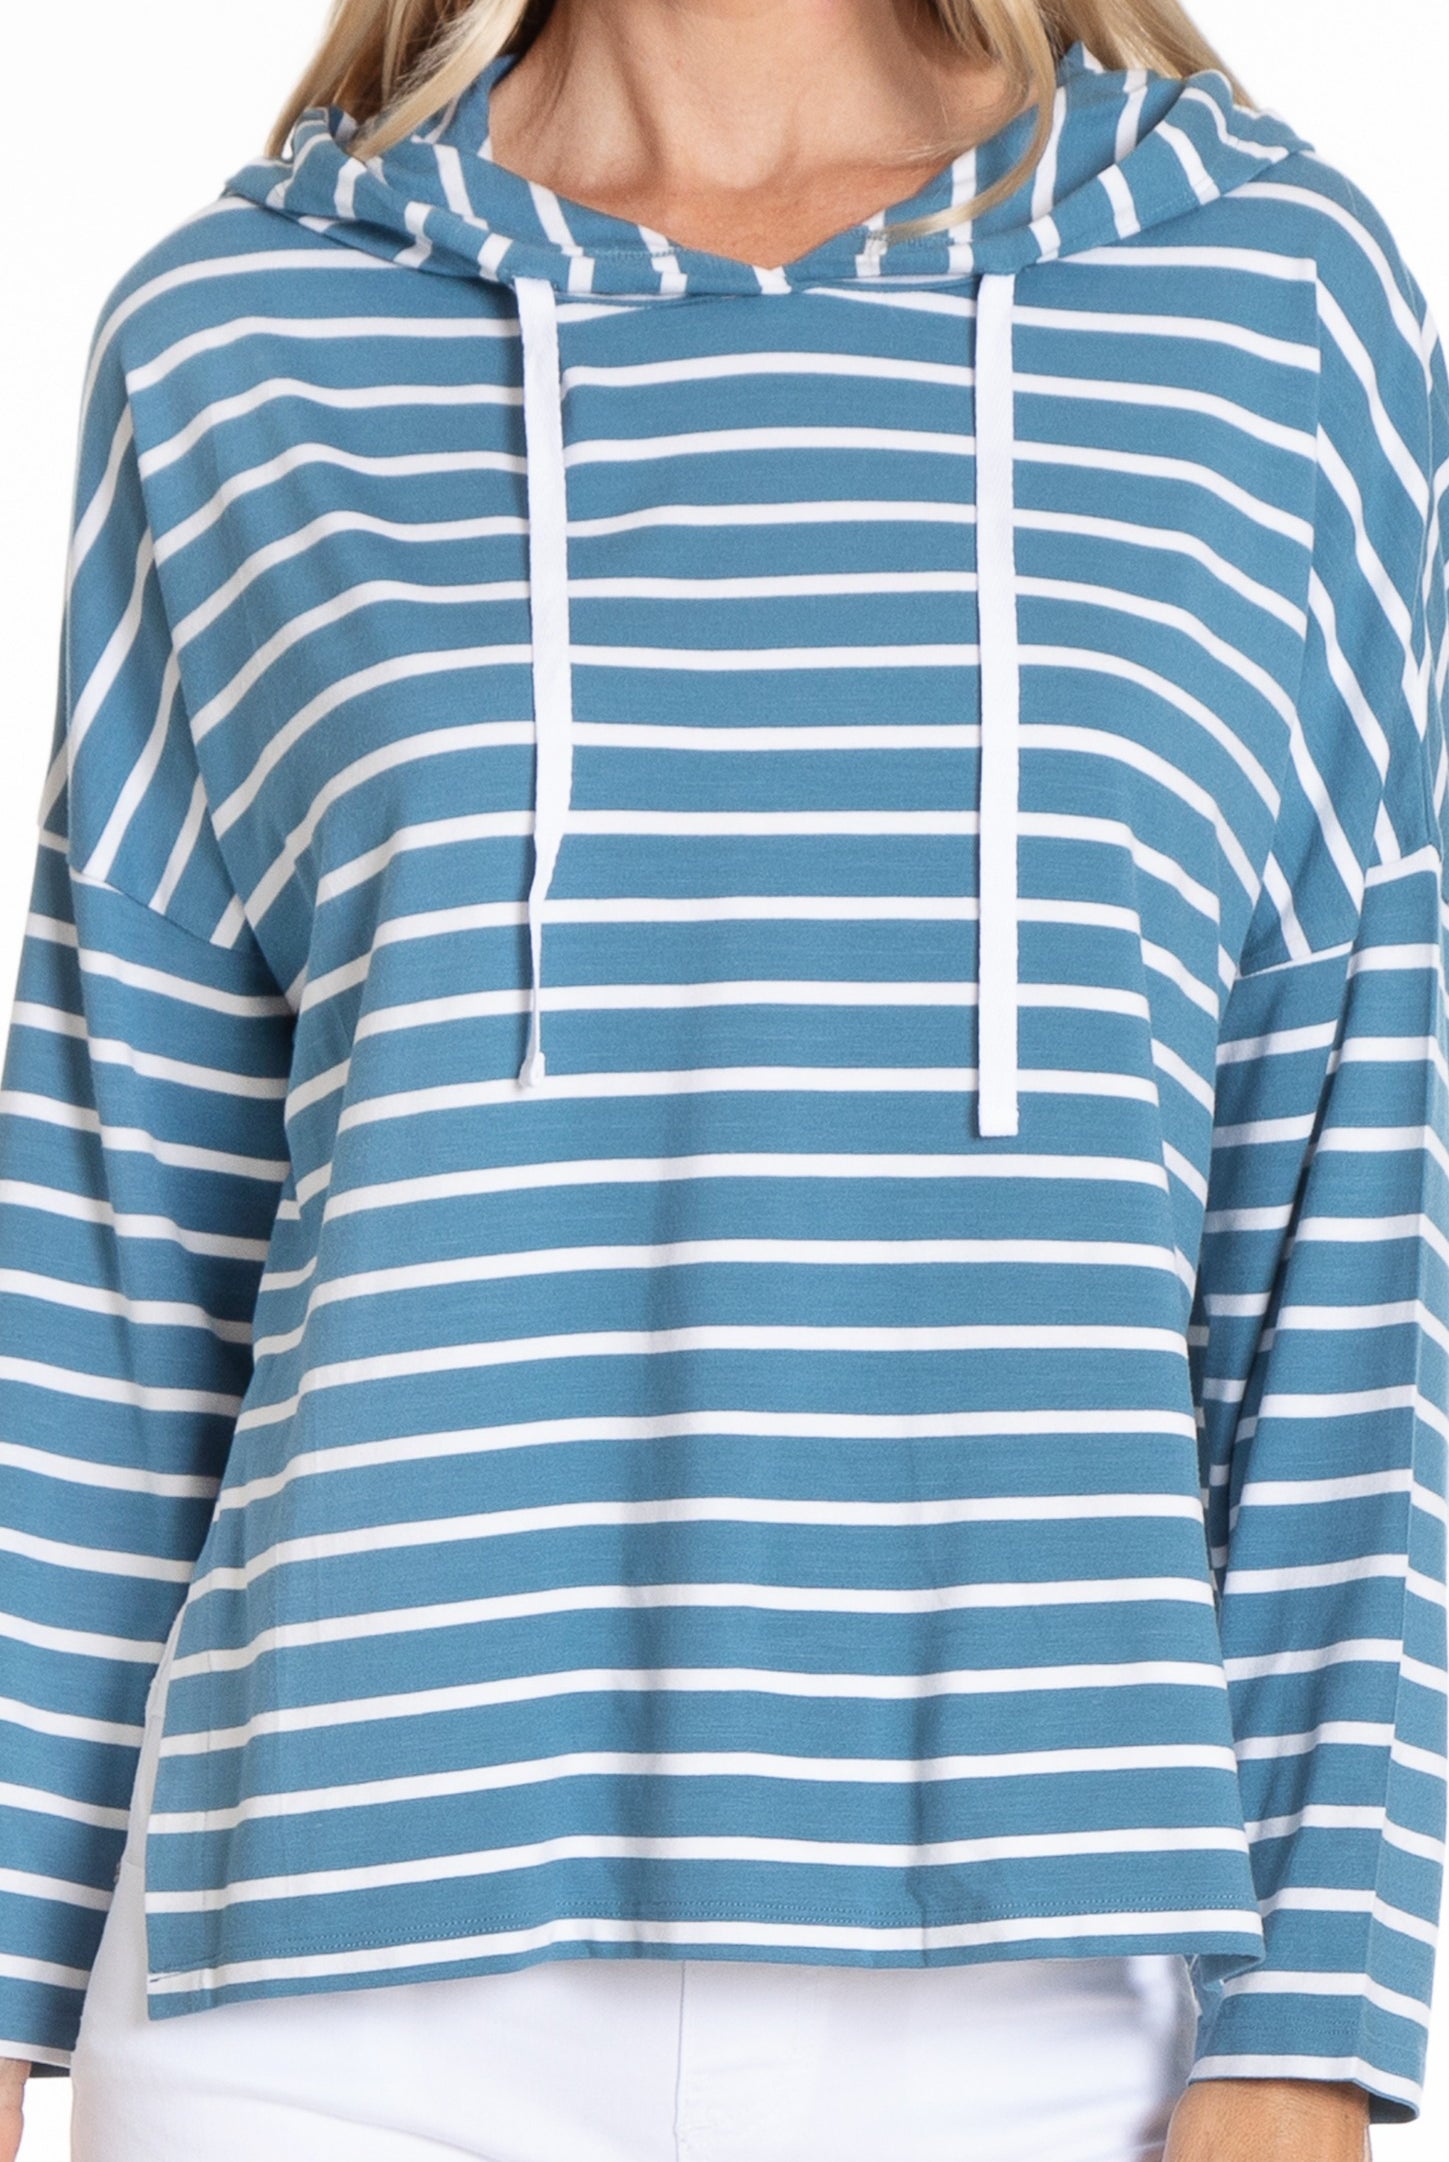 Hoodie With Side Slits Chambray/White Stripe Neck APNY